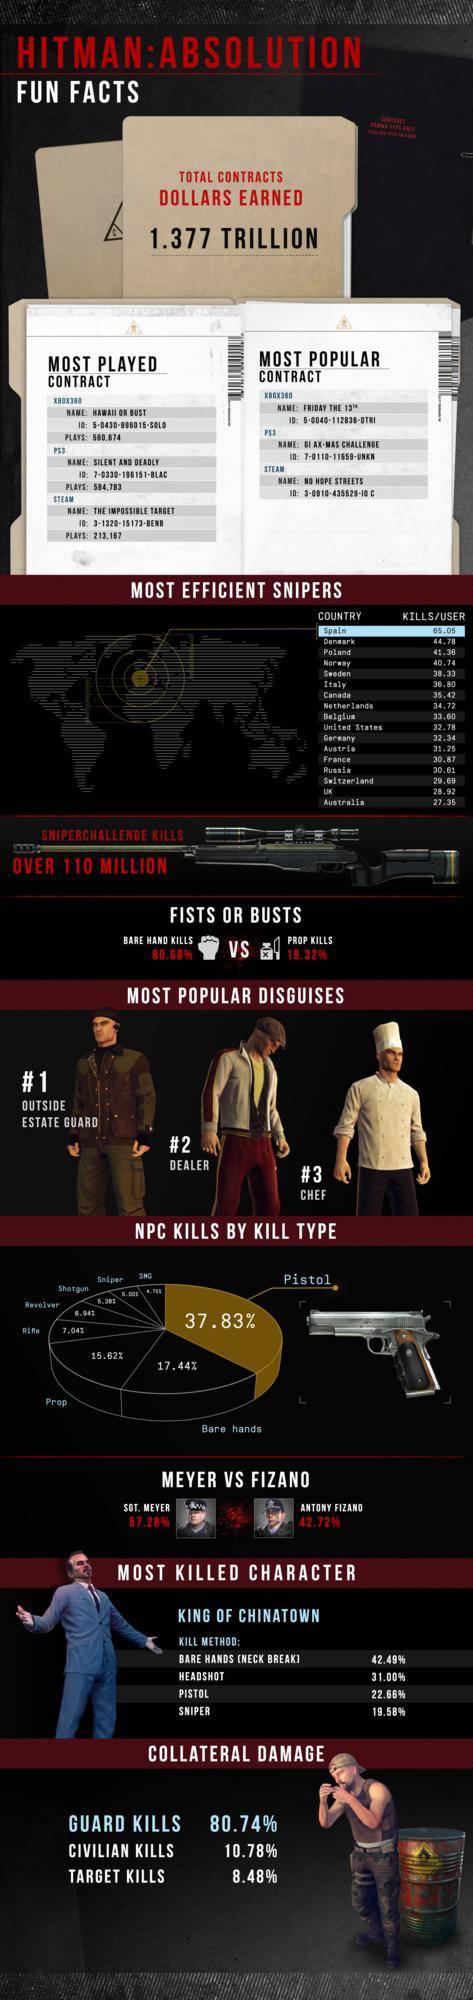 4752HitmanAbsolution_Contracts_infographic_473x2000